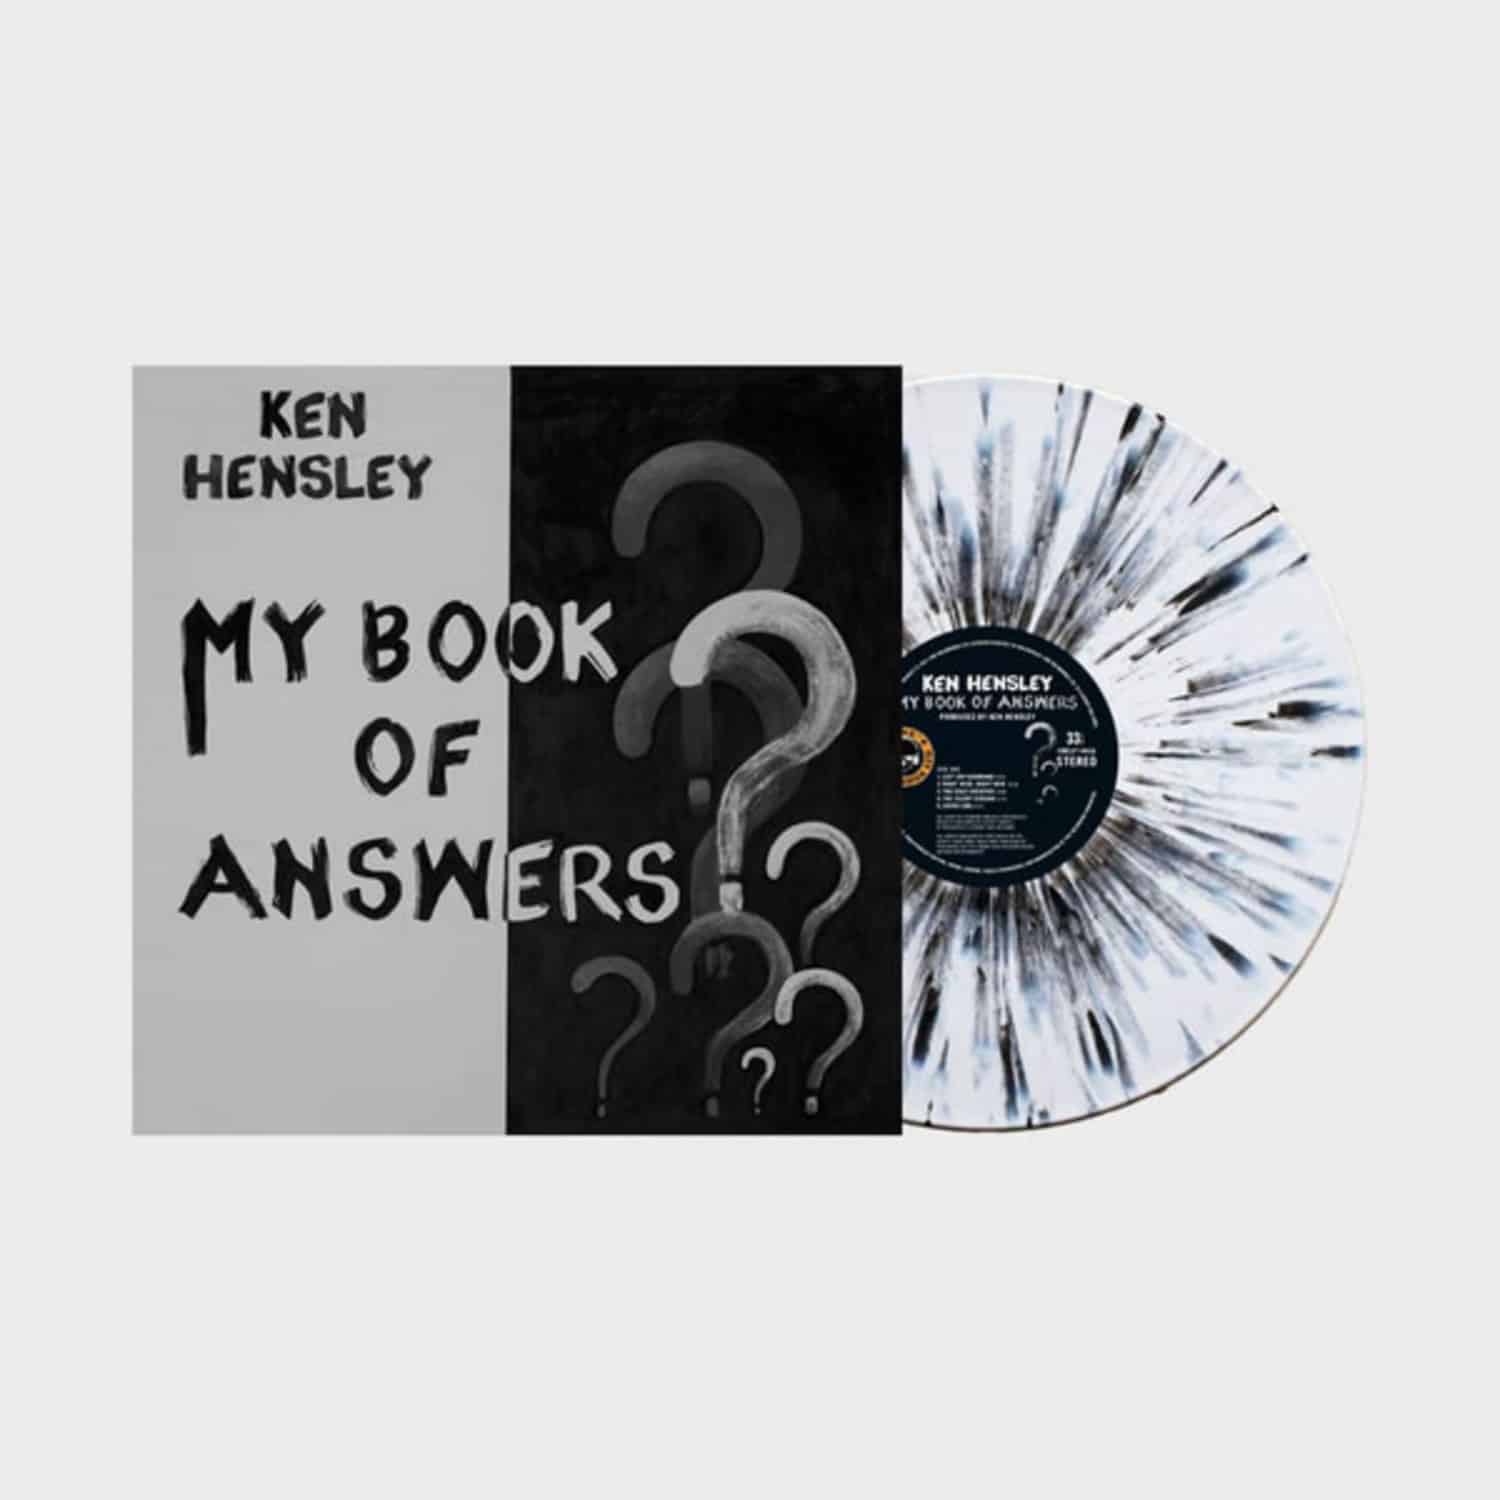 Ken Hensley - MY BOOK OF ANSWERS 